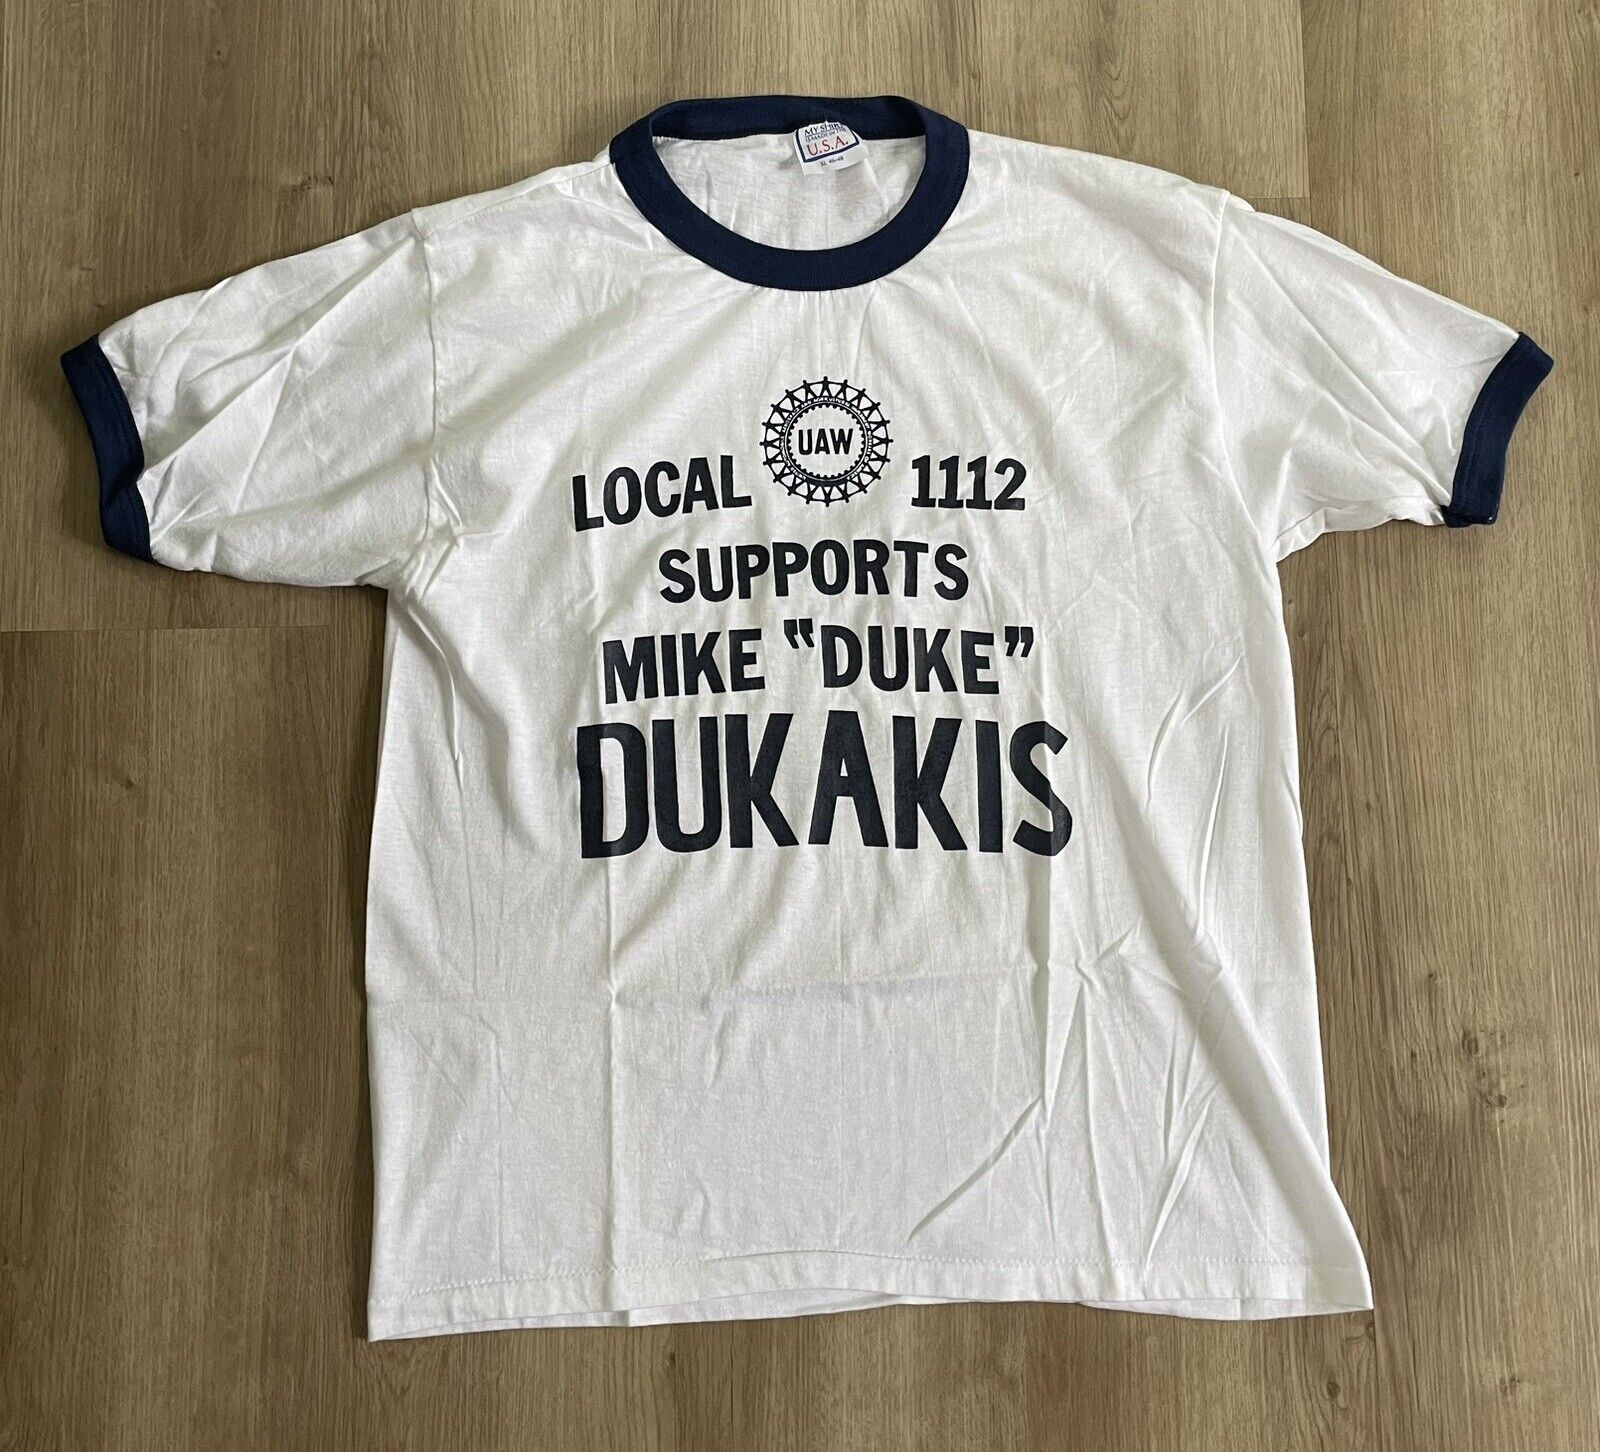 VTG Support Mike Dukakis UAW 1112 T-Shirt XL Local Union Ringer Tee GM Warren,OH